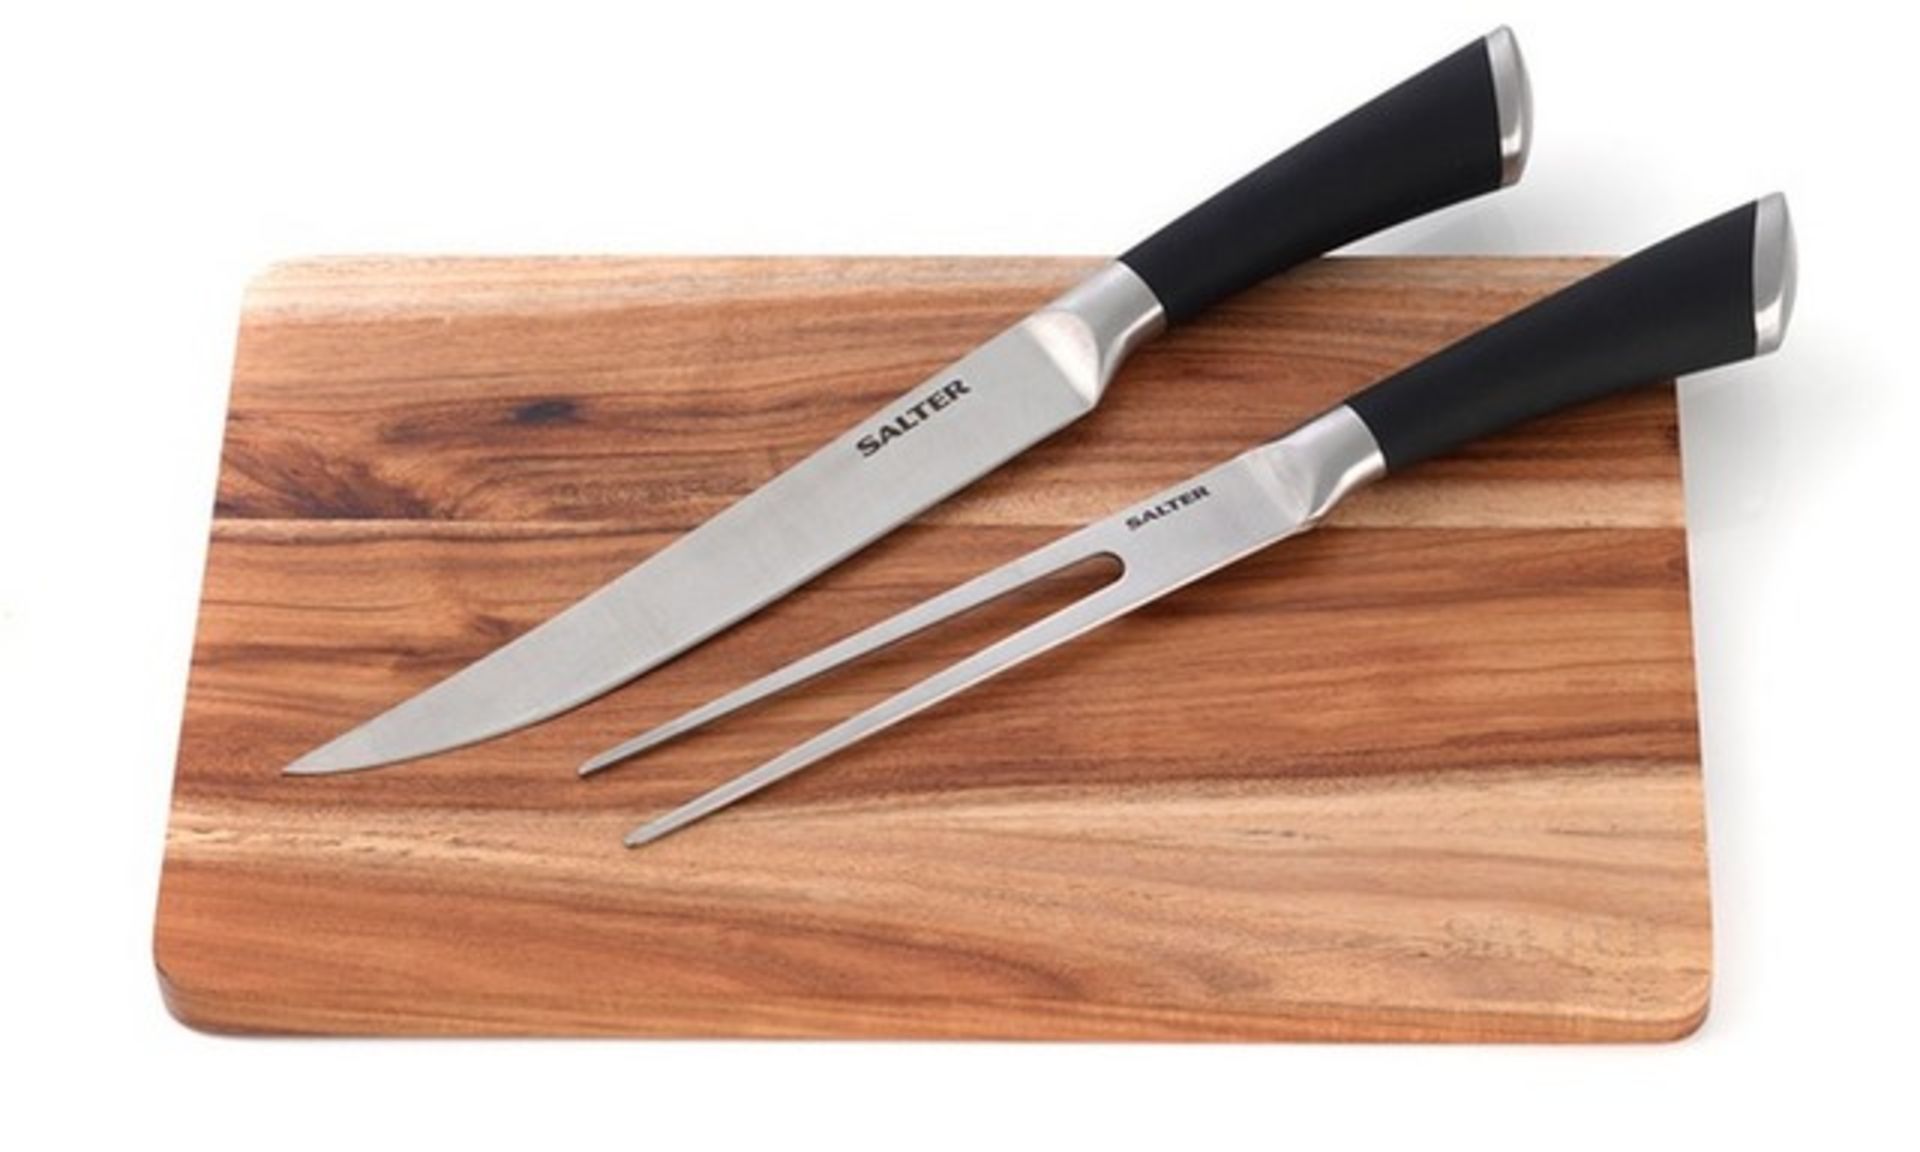 V Brand New Salter Elegance Carving Knife And Fork With Chopping Board ISP £46.99 (Mahahome.com)